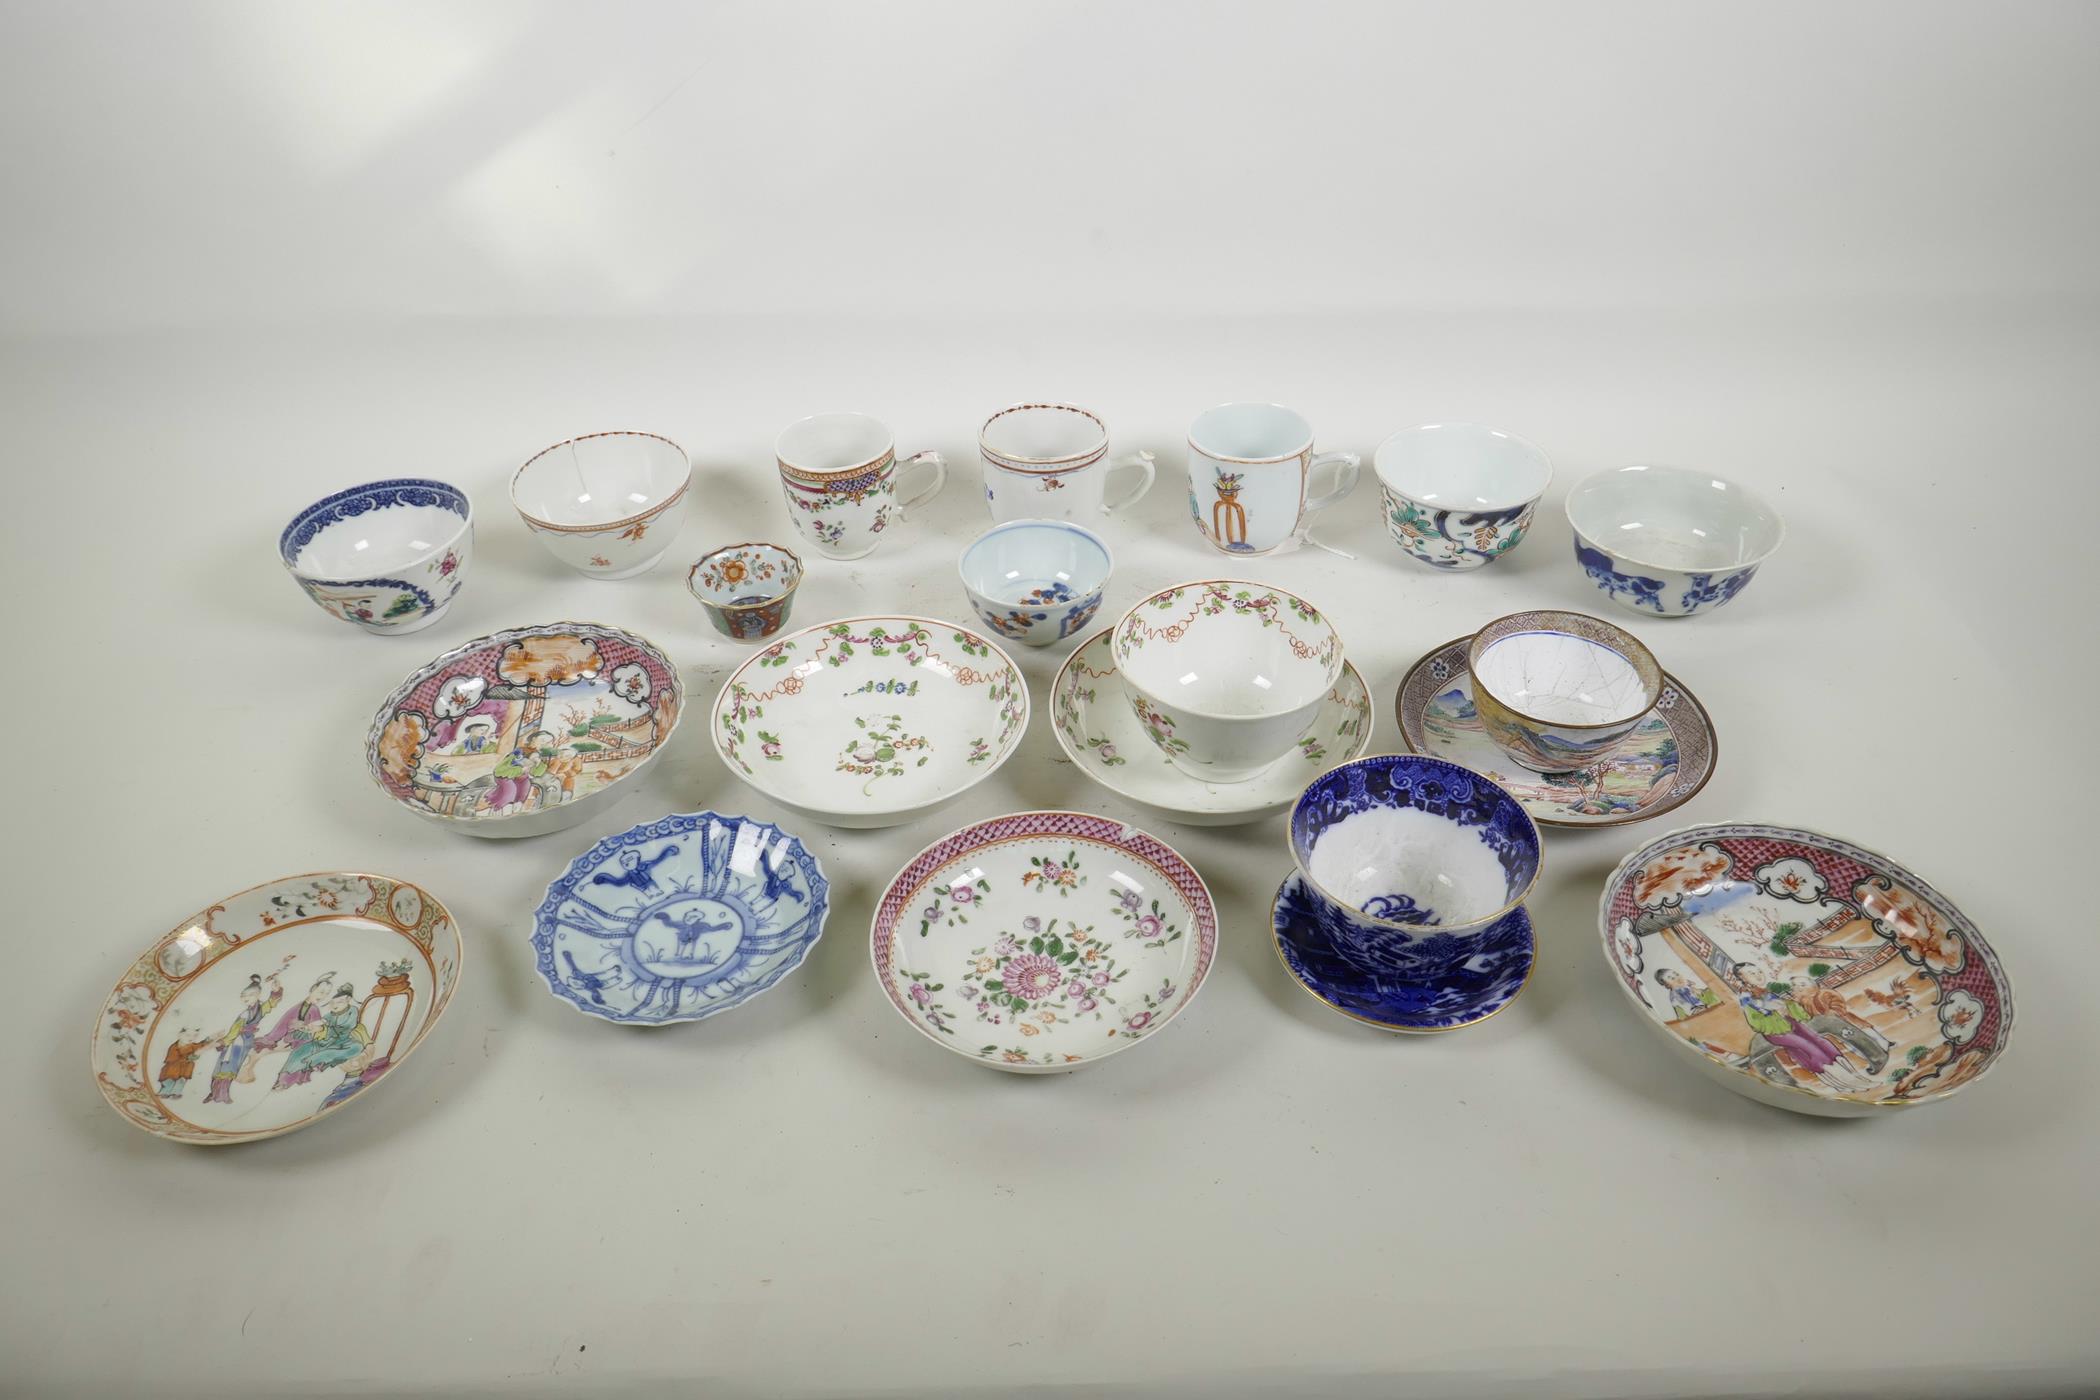 A quantity of C18th Chinese export porcelain tea bowls, tea cups and saucers, with famille rose,